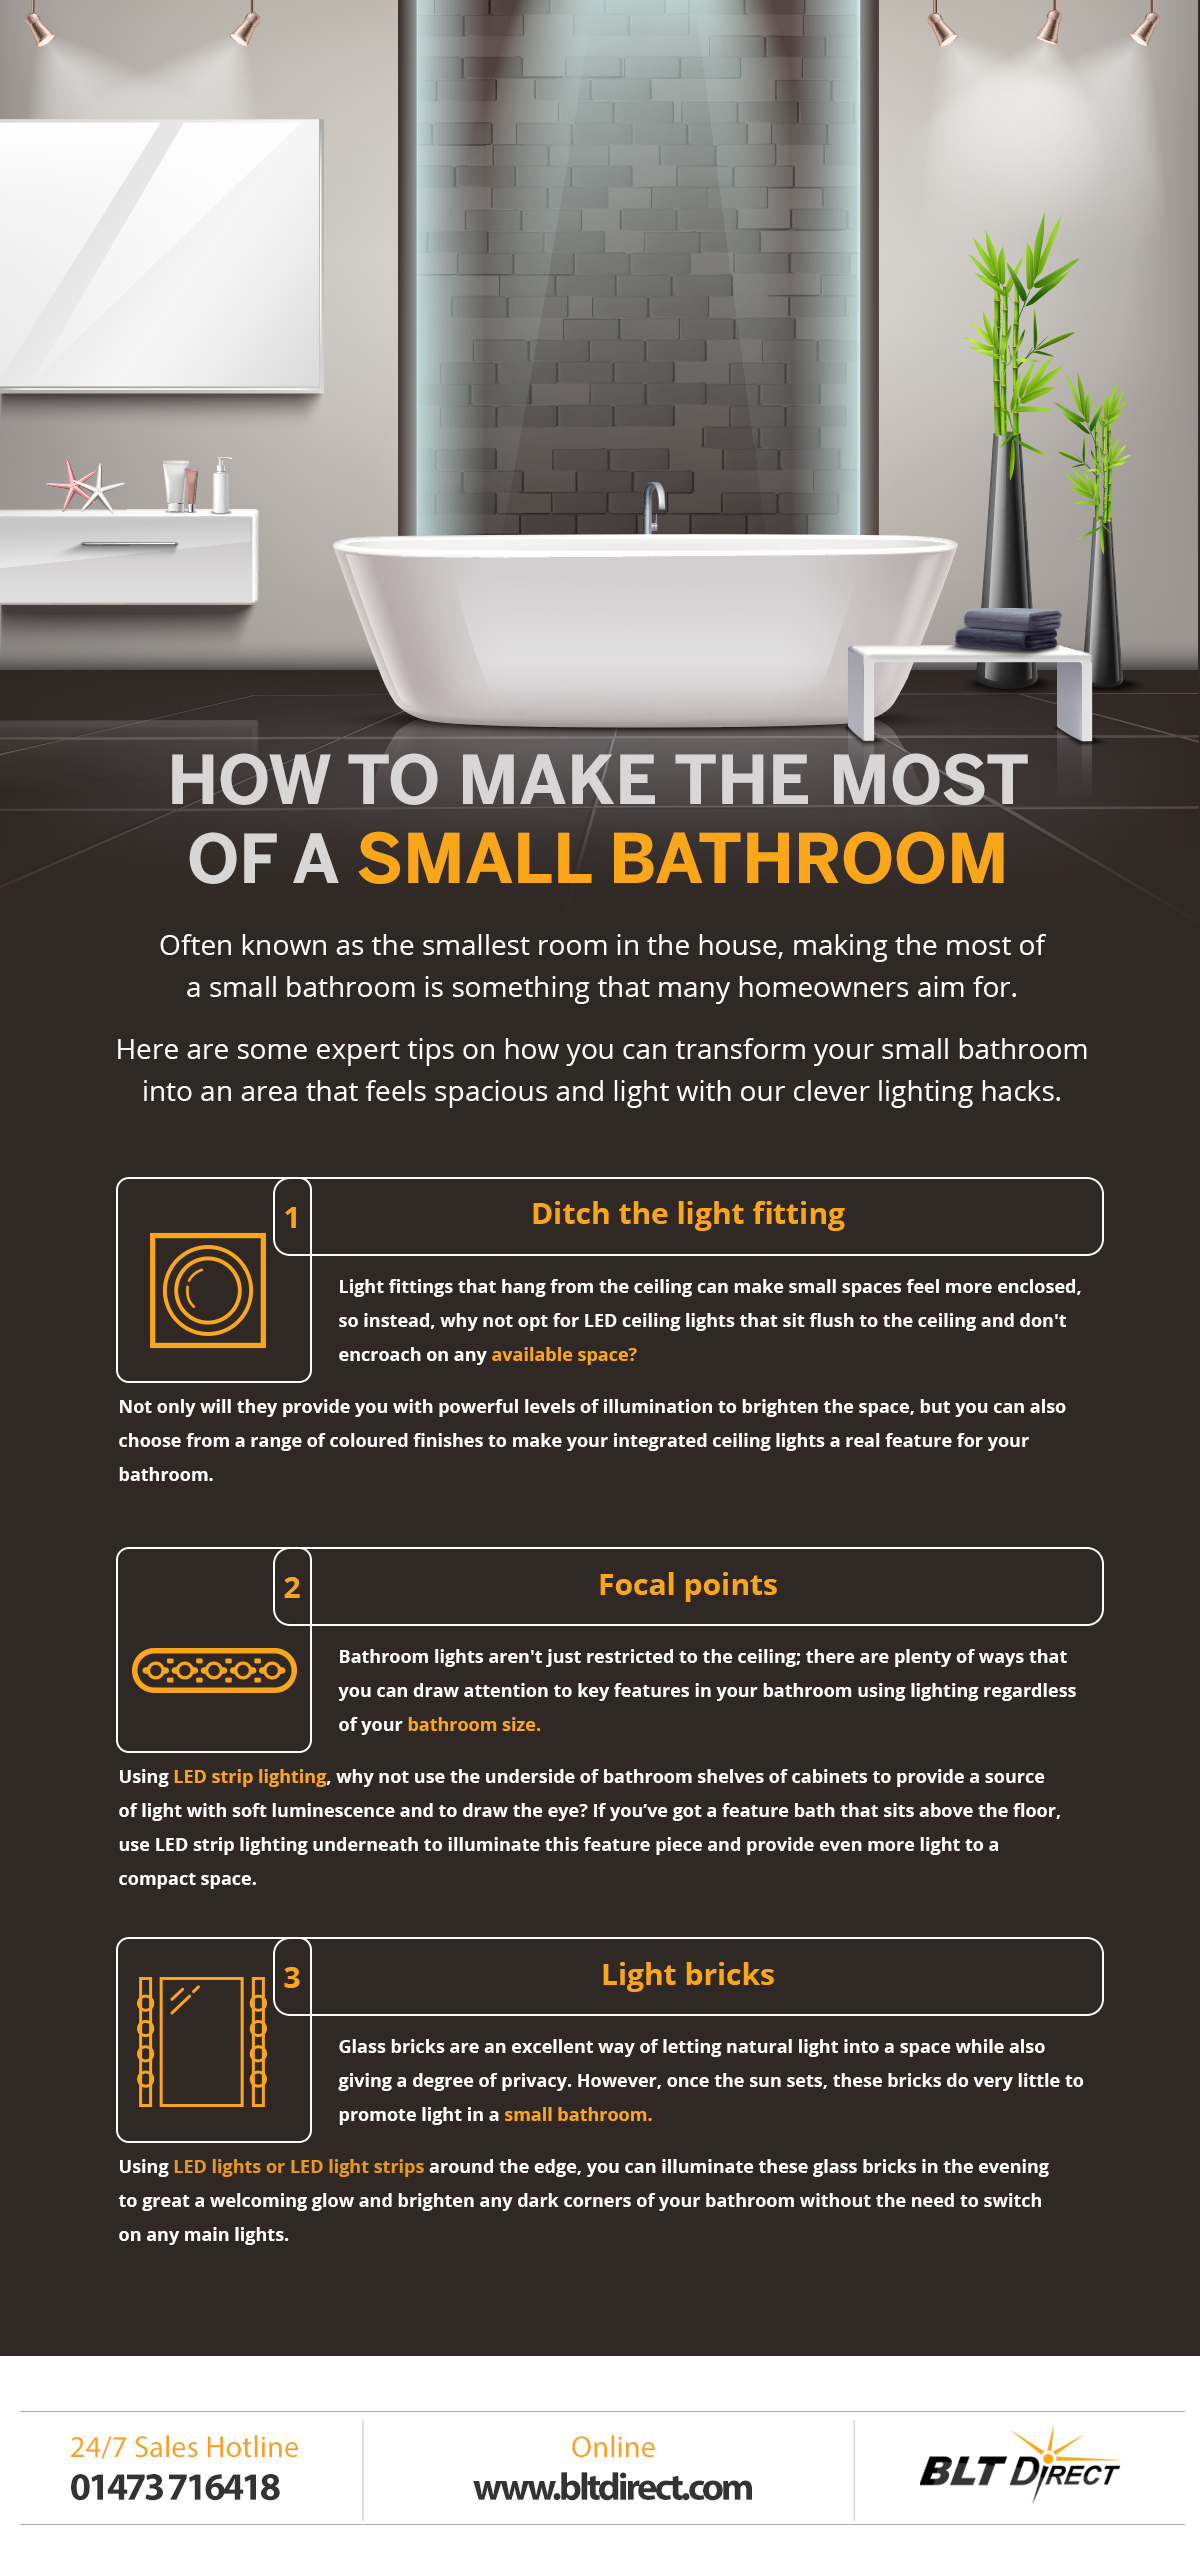 How To Make The Most of a Small Bathroom